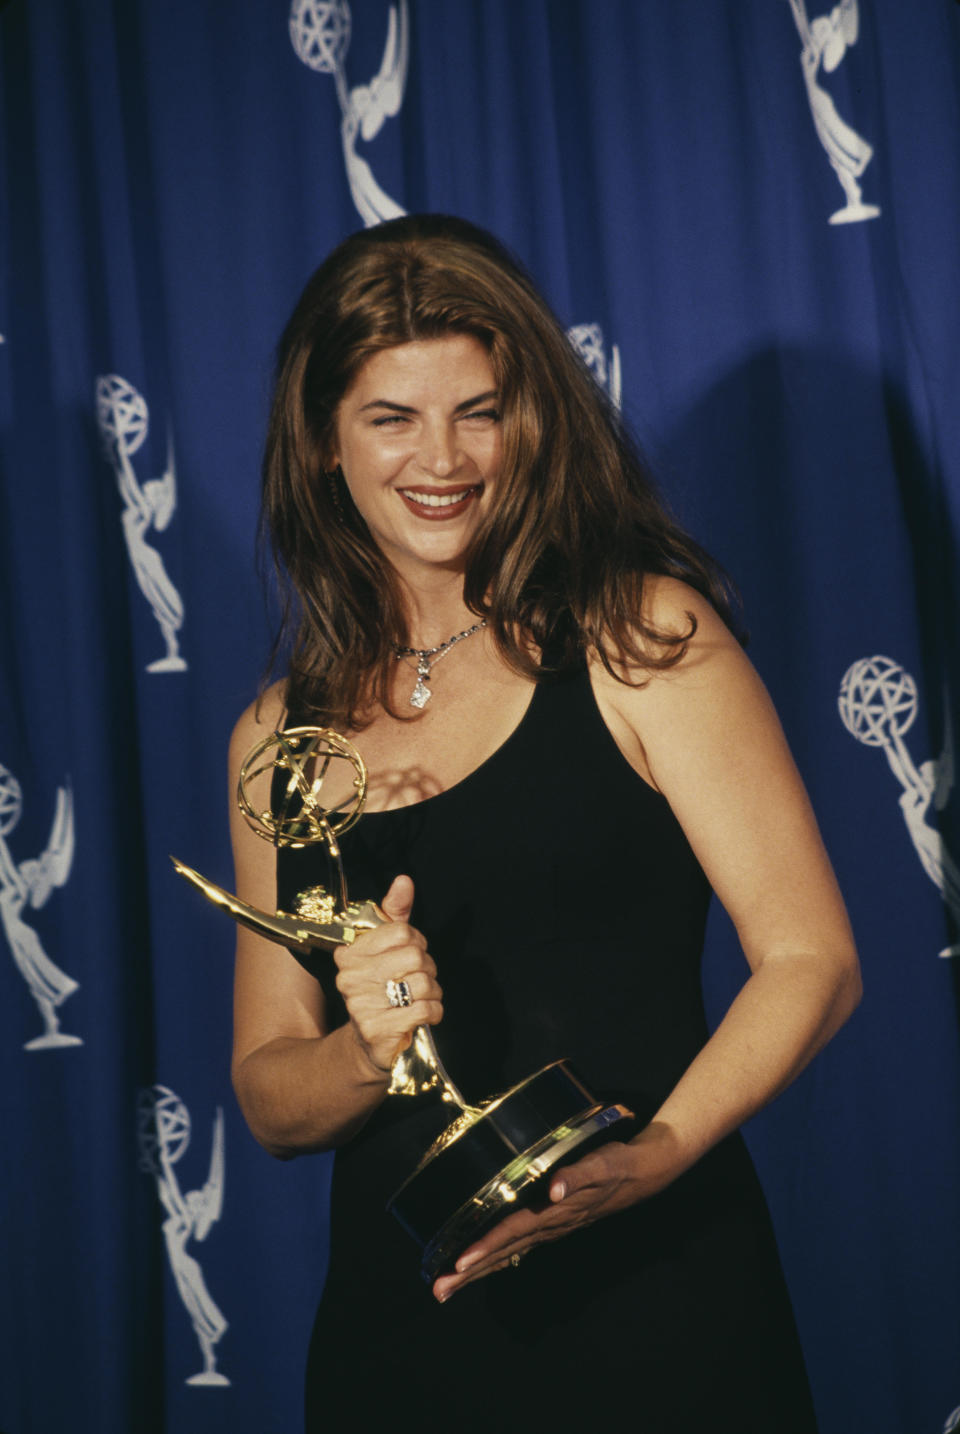 Actress Kirstie Alley attends the 1994 Primetime Emmy Awards, in Pasadena, California, on Sept. 11, 1994. / Credit: Getty Images